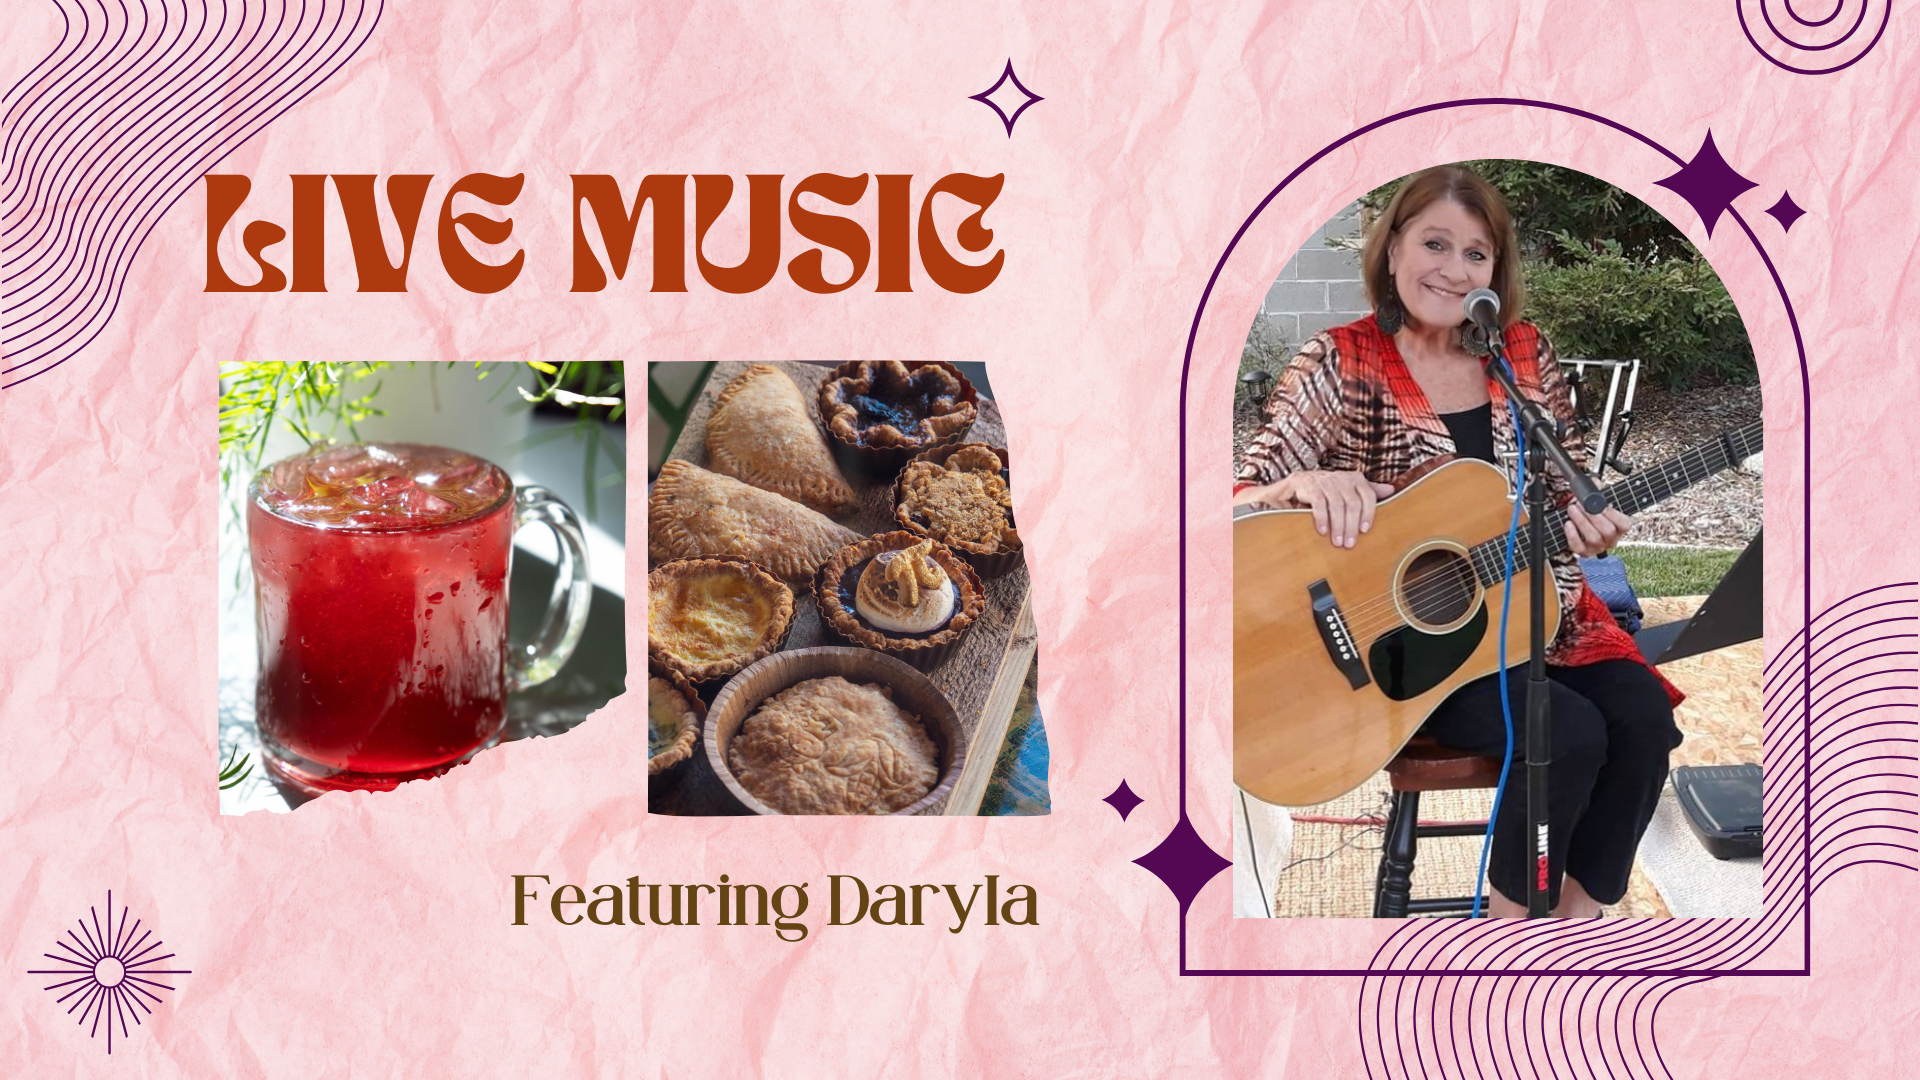 Live music featuring Daryla